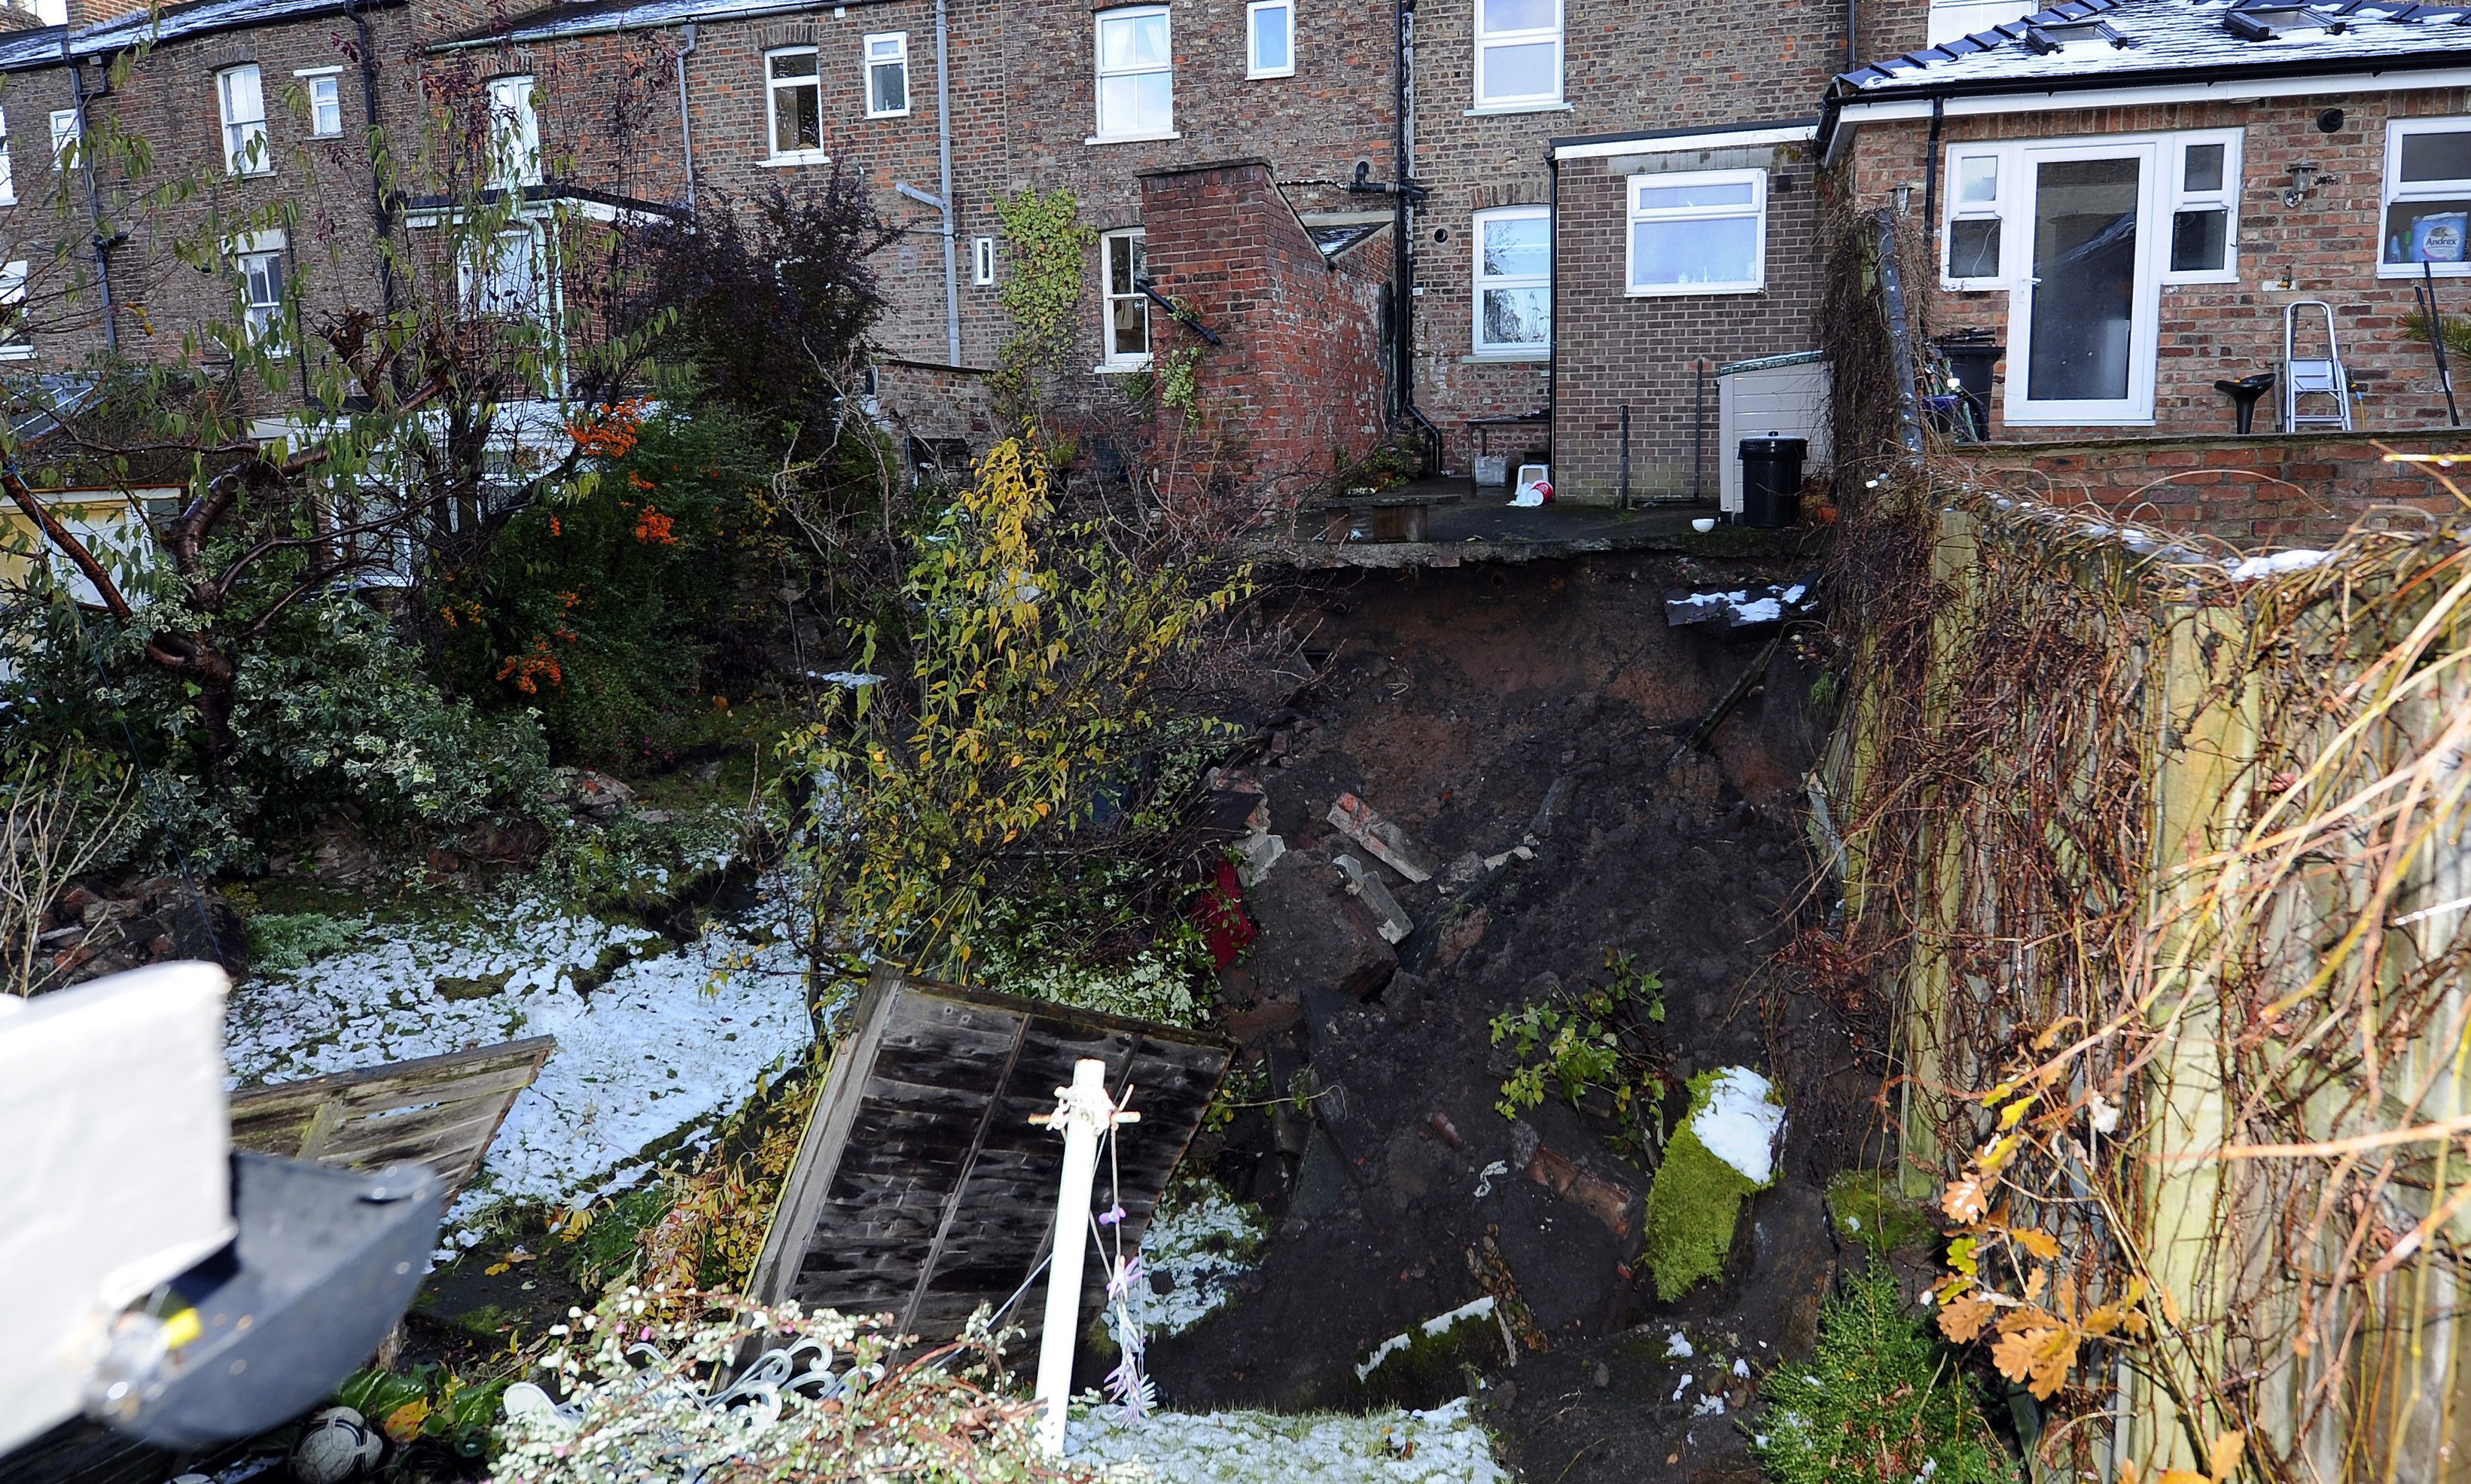 The sink hole "with an unknown depth" which appeared in gardens in Ripon, North Yorkshire.